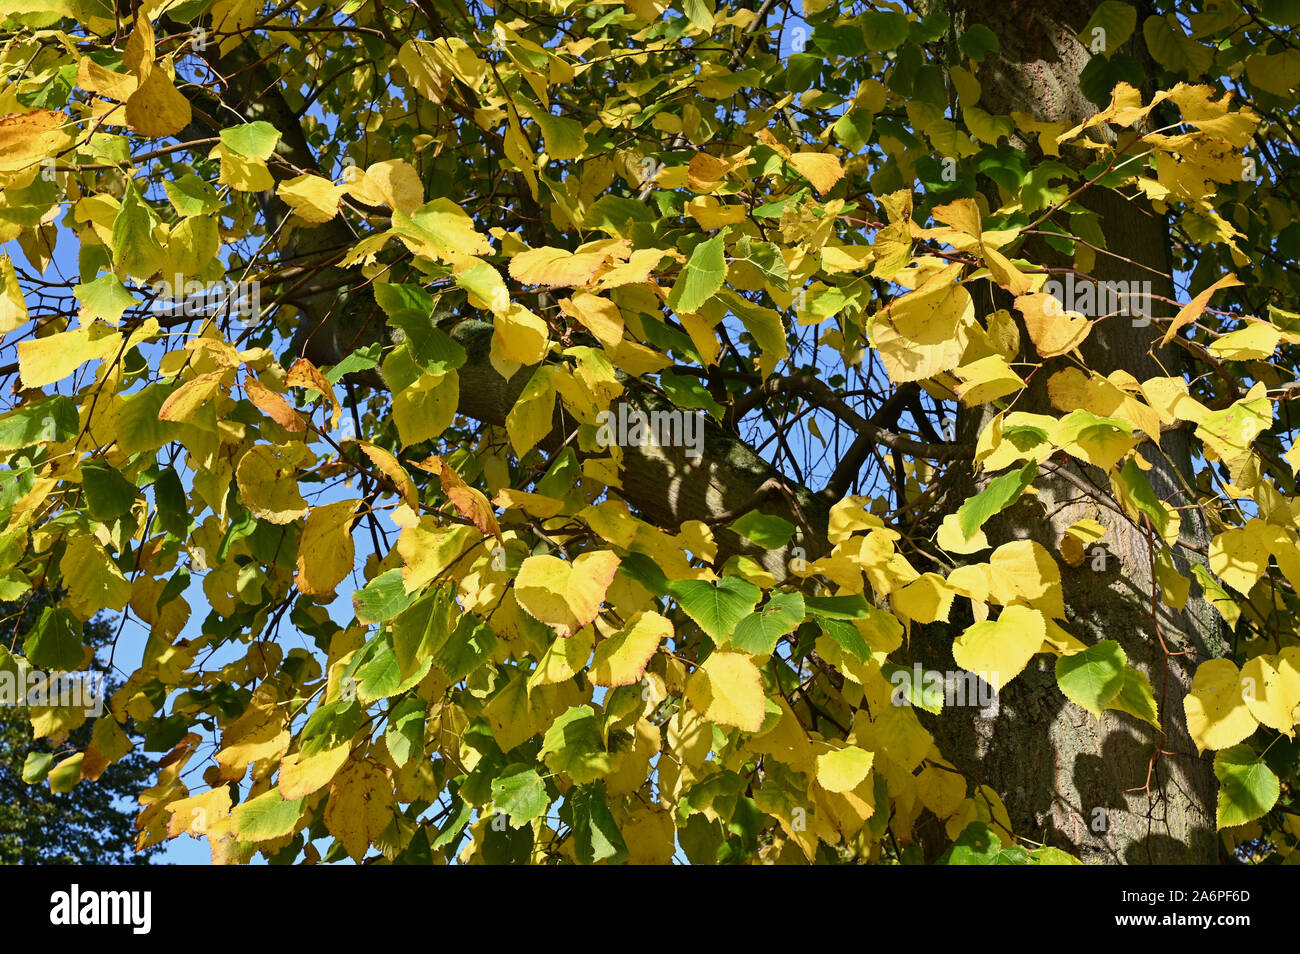 Autumn leaves on a tree. Stock Photo